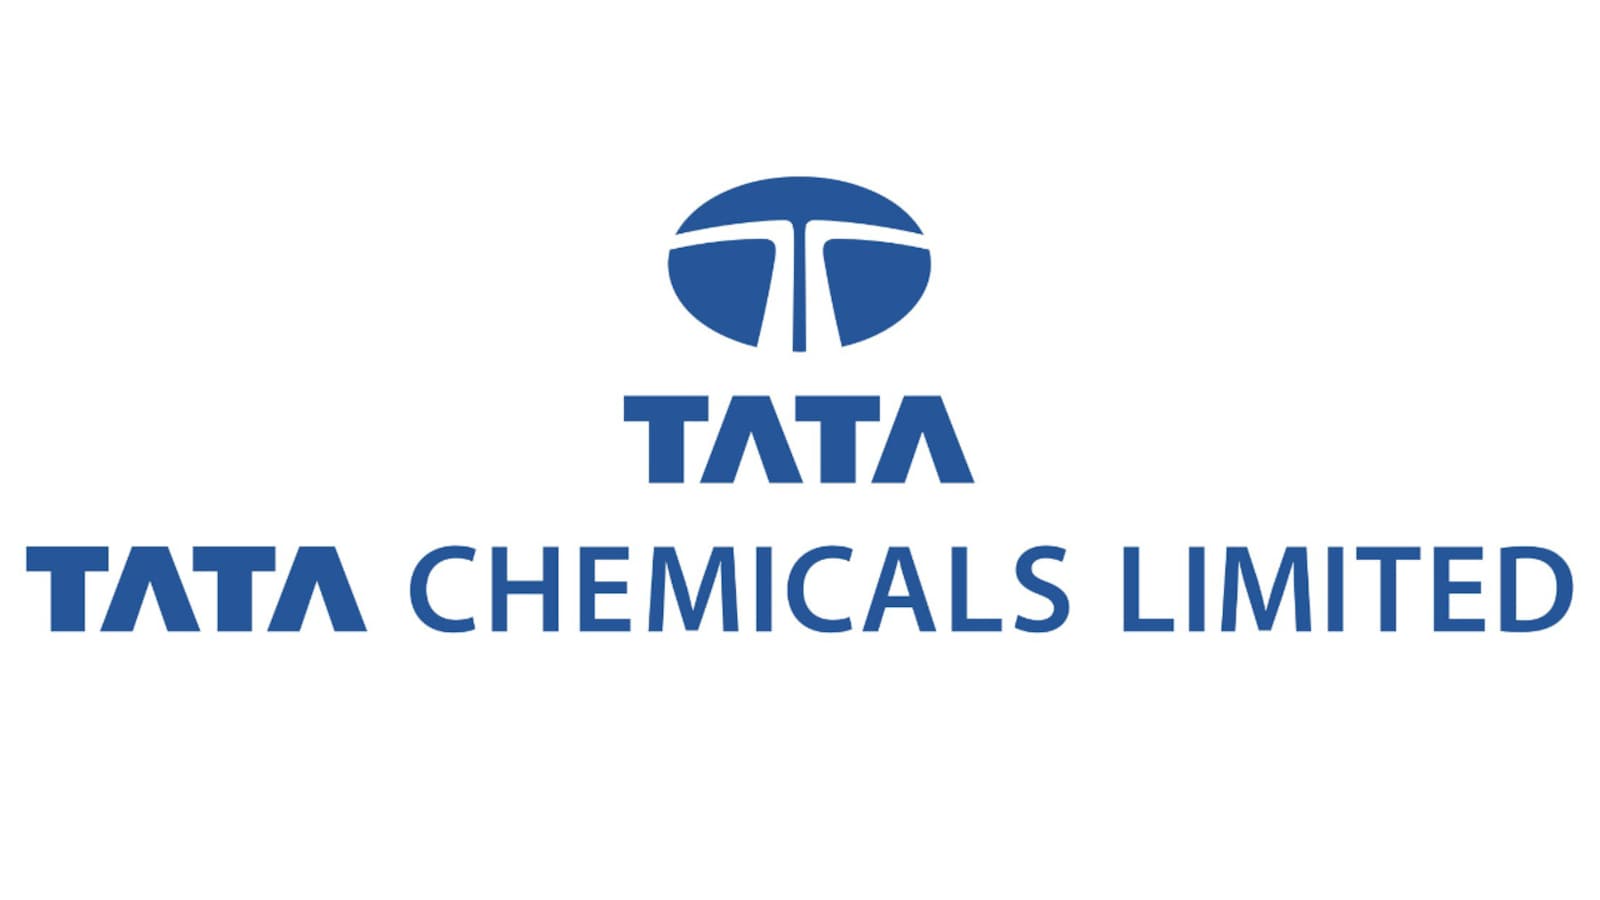 demerger of consumer business – what it means for tata chemicals